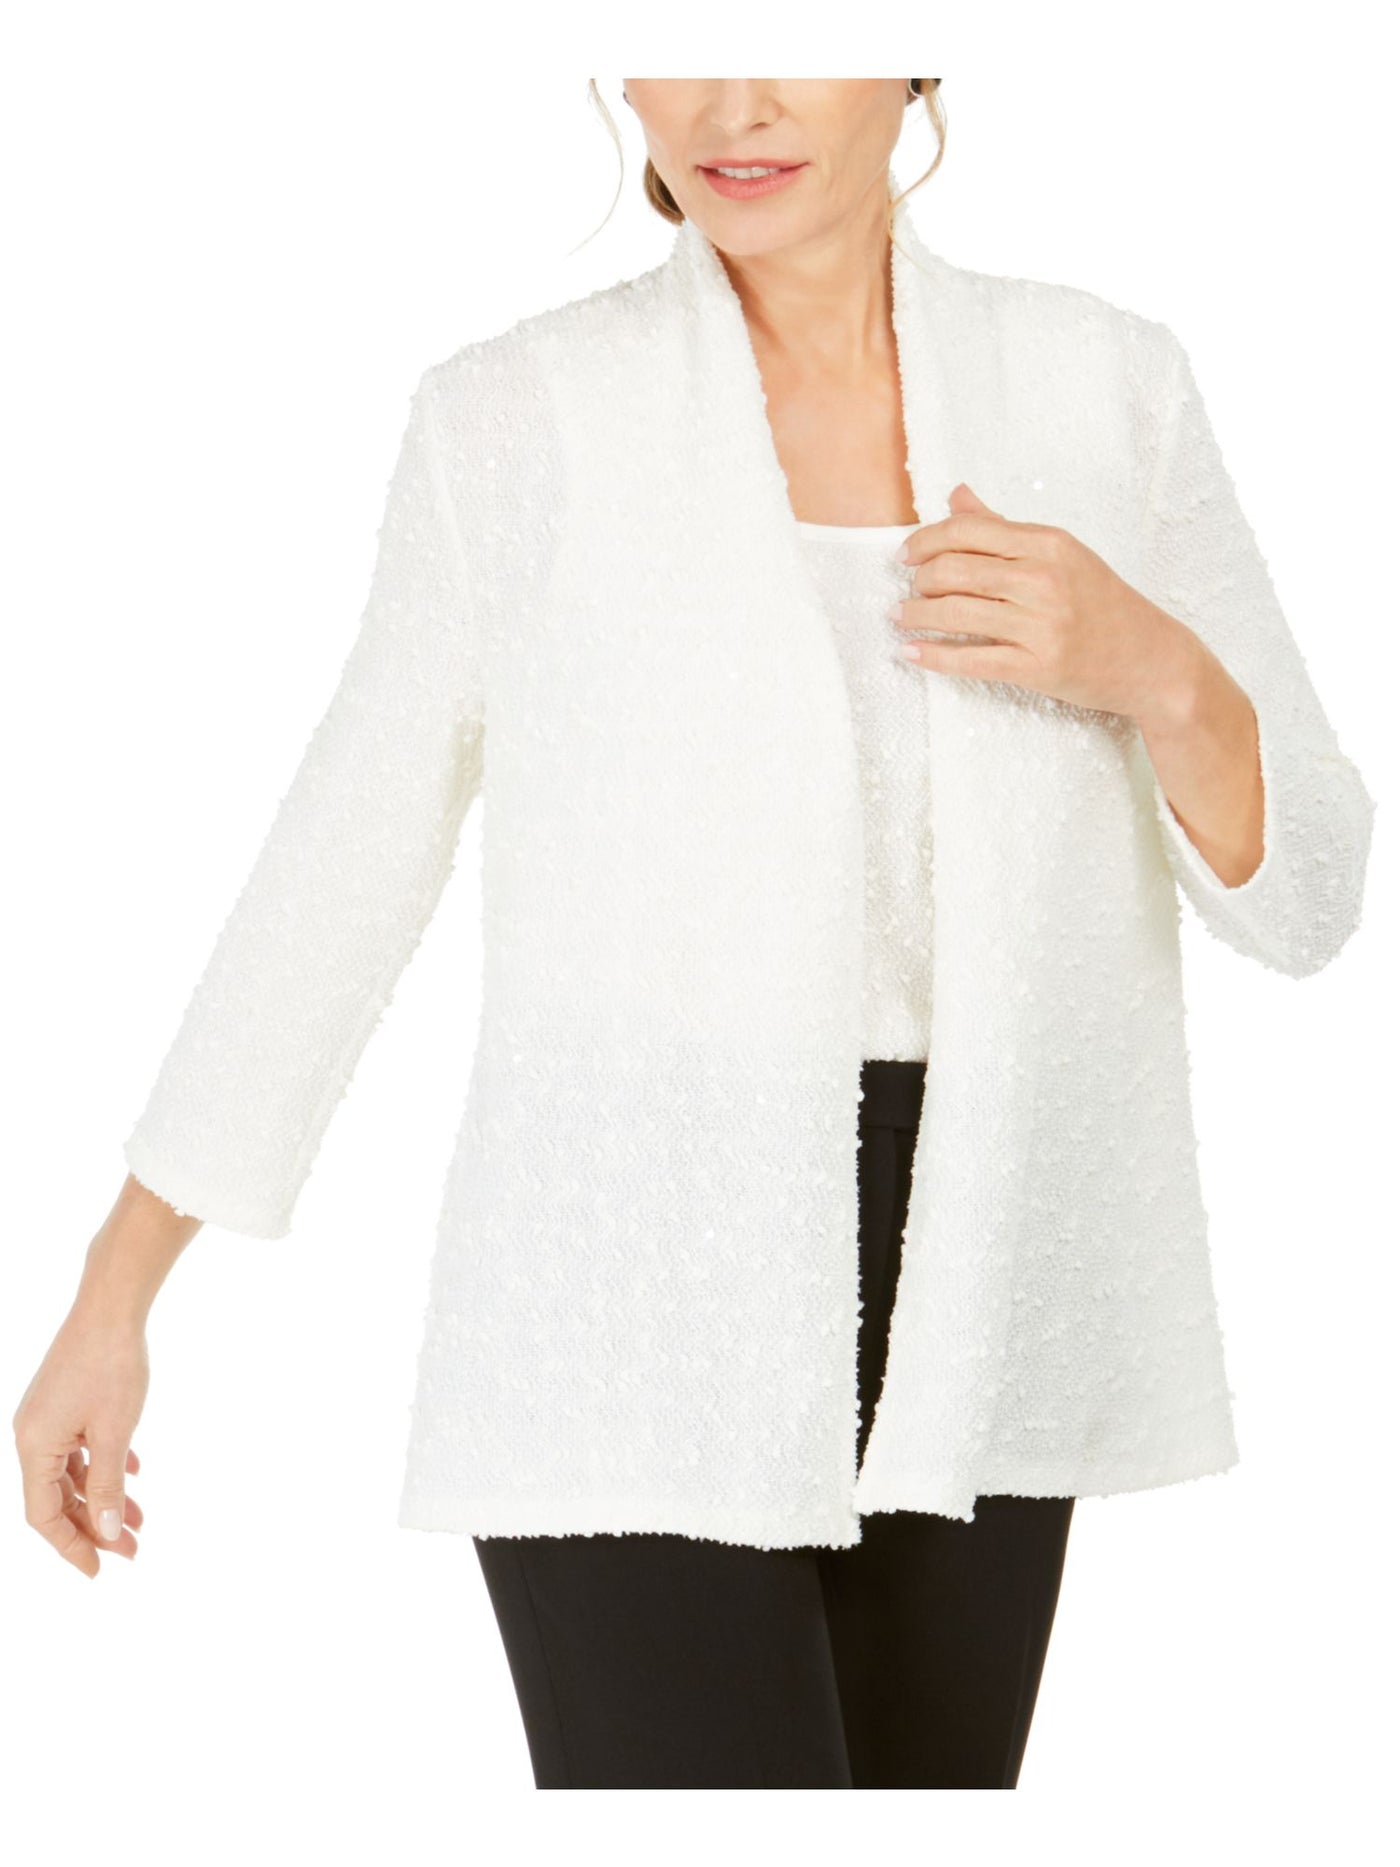 KASPER Womens Ivory Embroidered Textured 3/4 Sleeve Open Cardigan Evening Top Petites PM